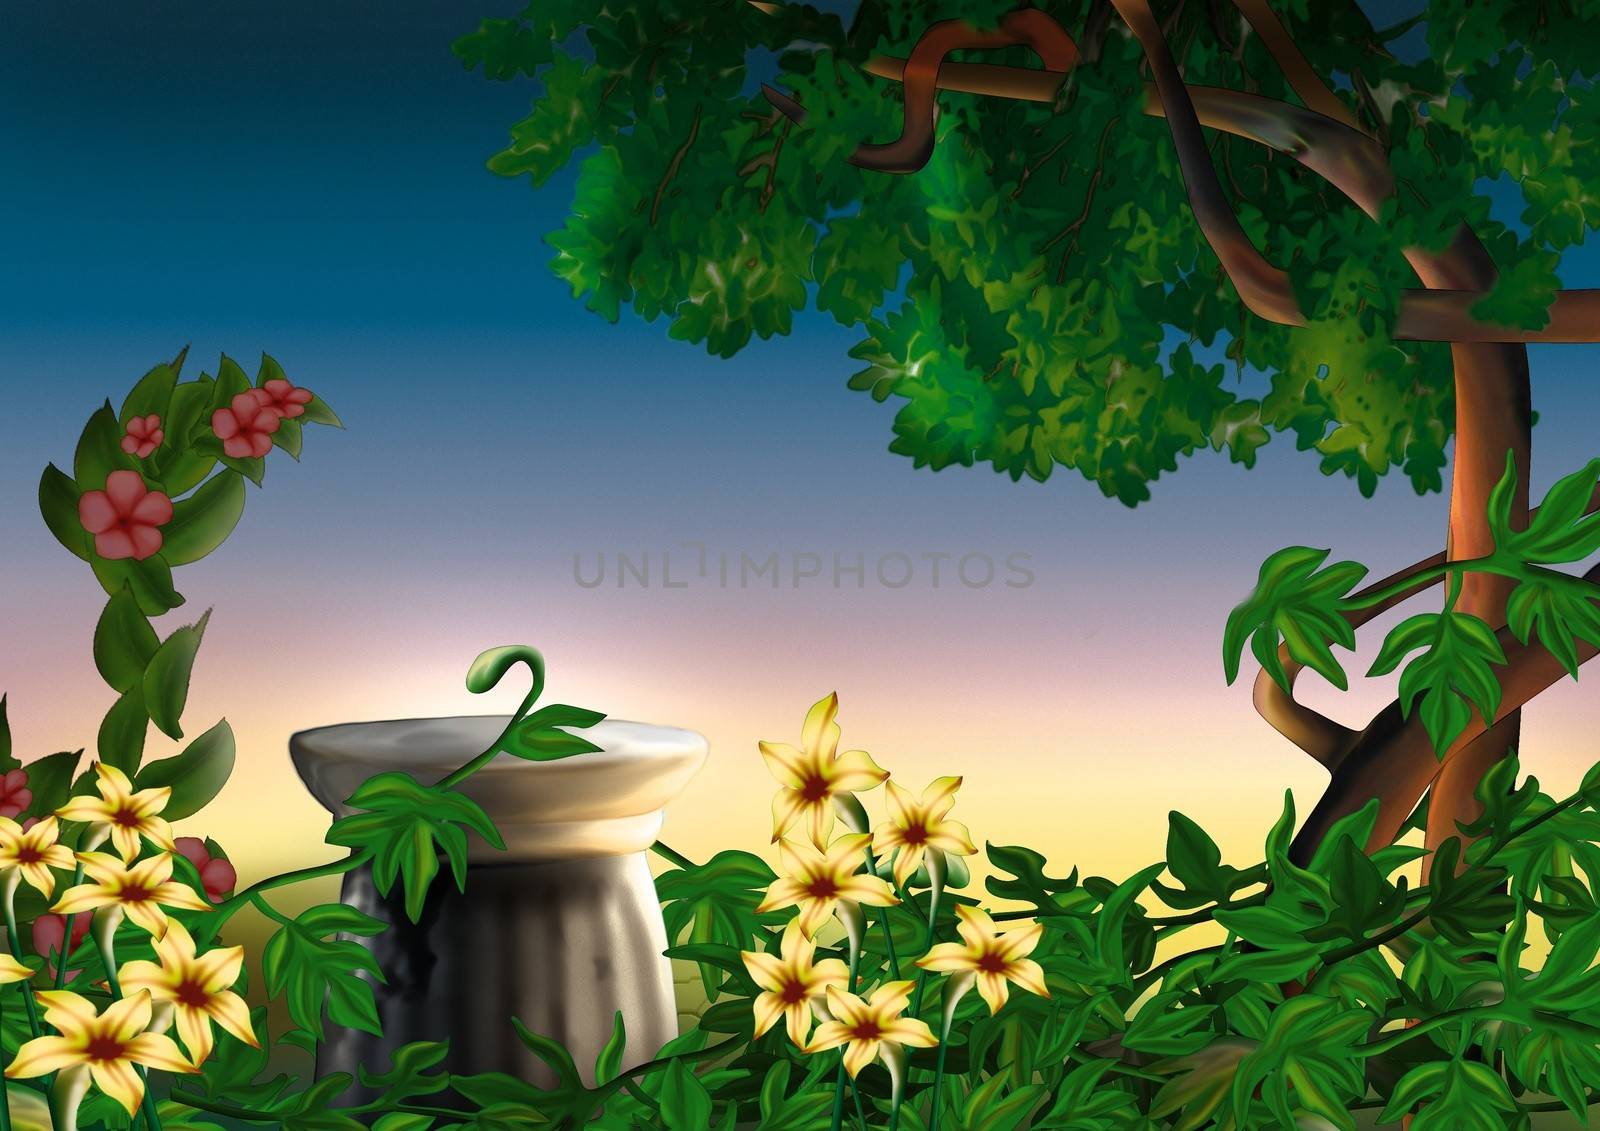 Park And Flowers - Background Illustration